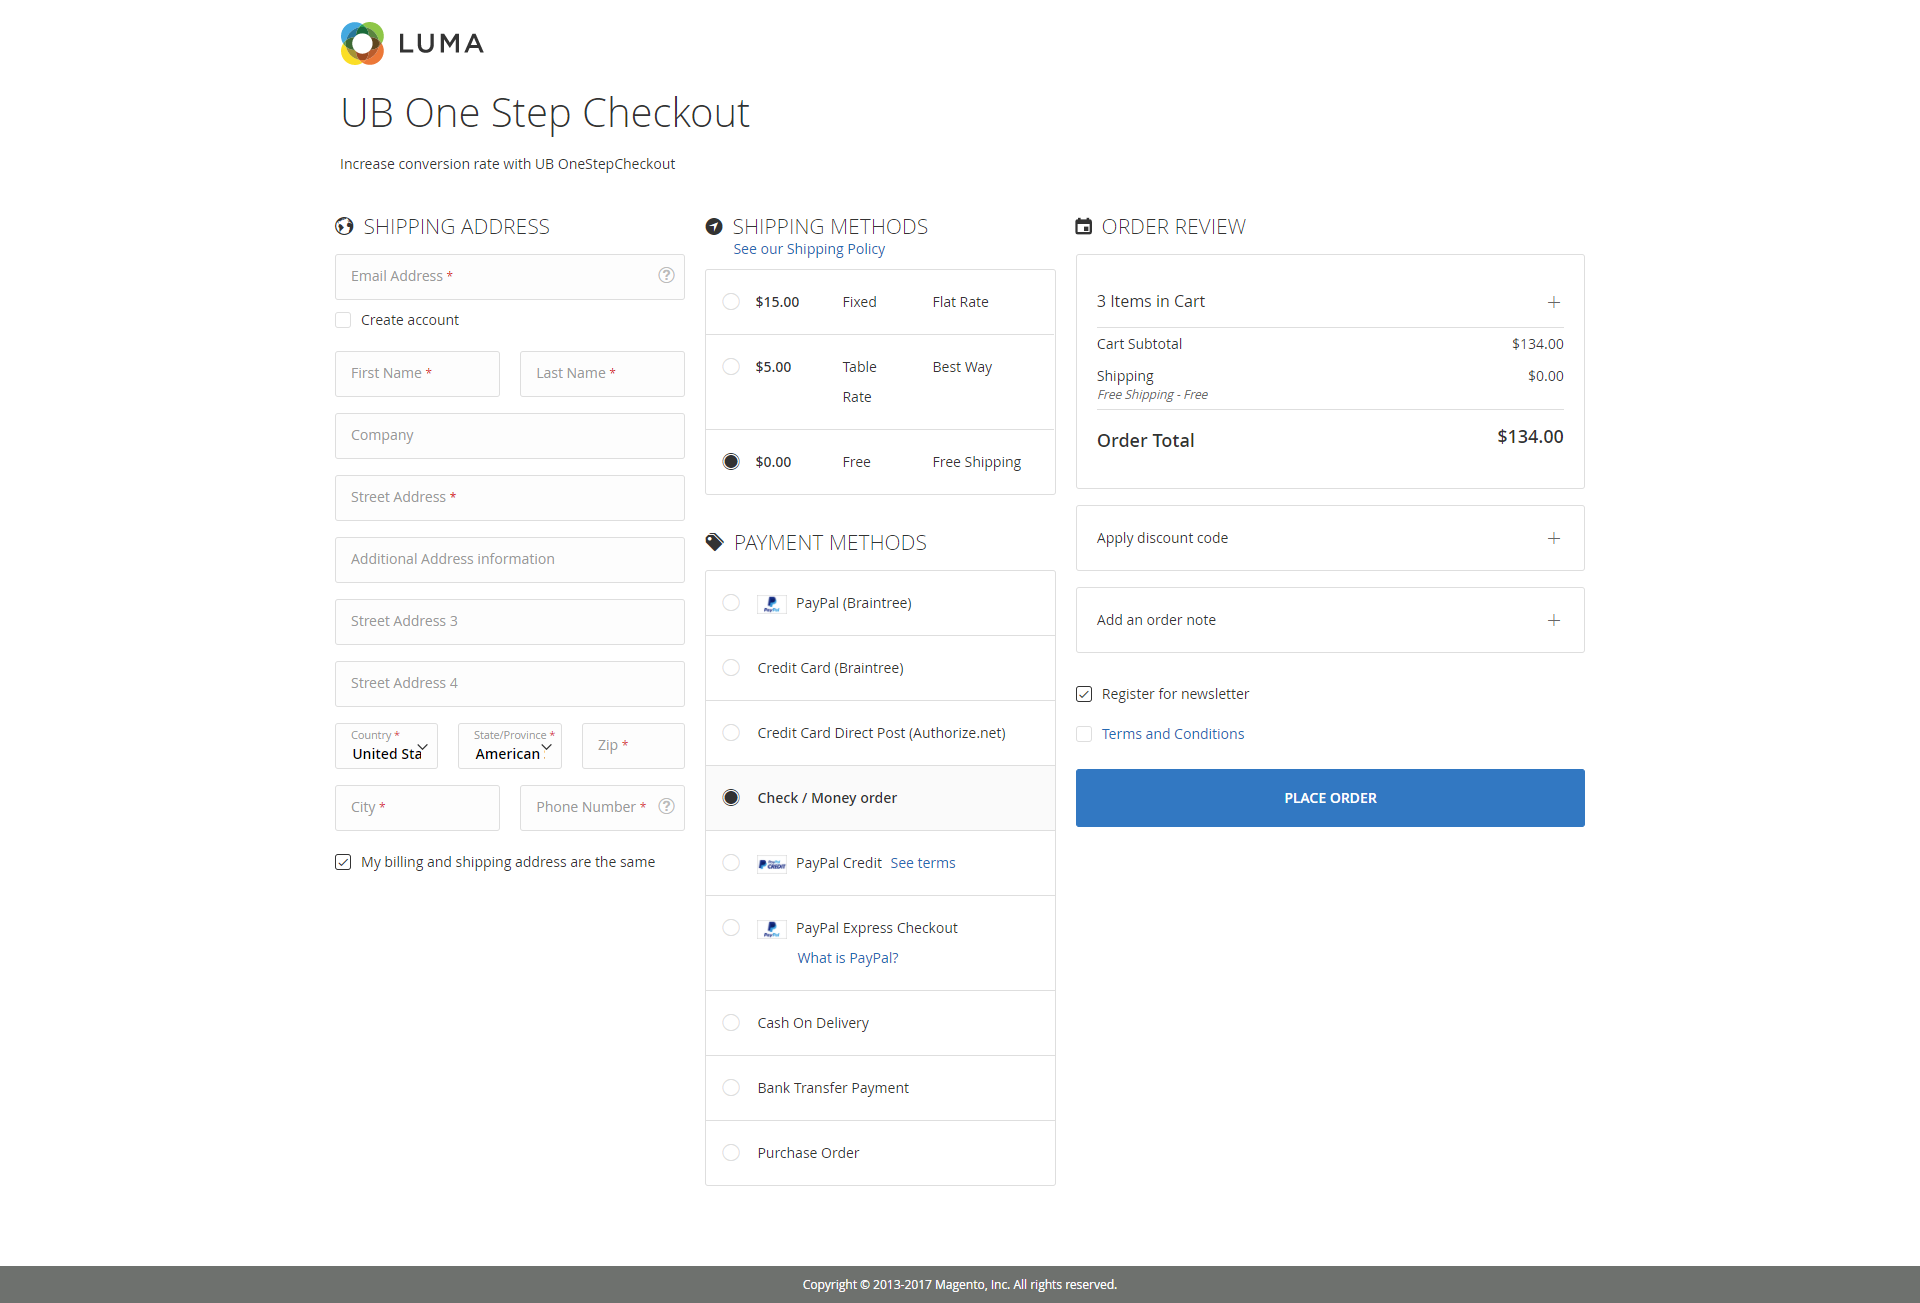 Magento 2 One Step Checkout - 2 Column Layout